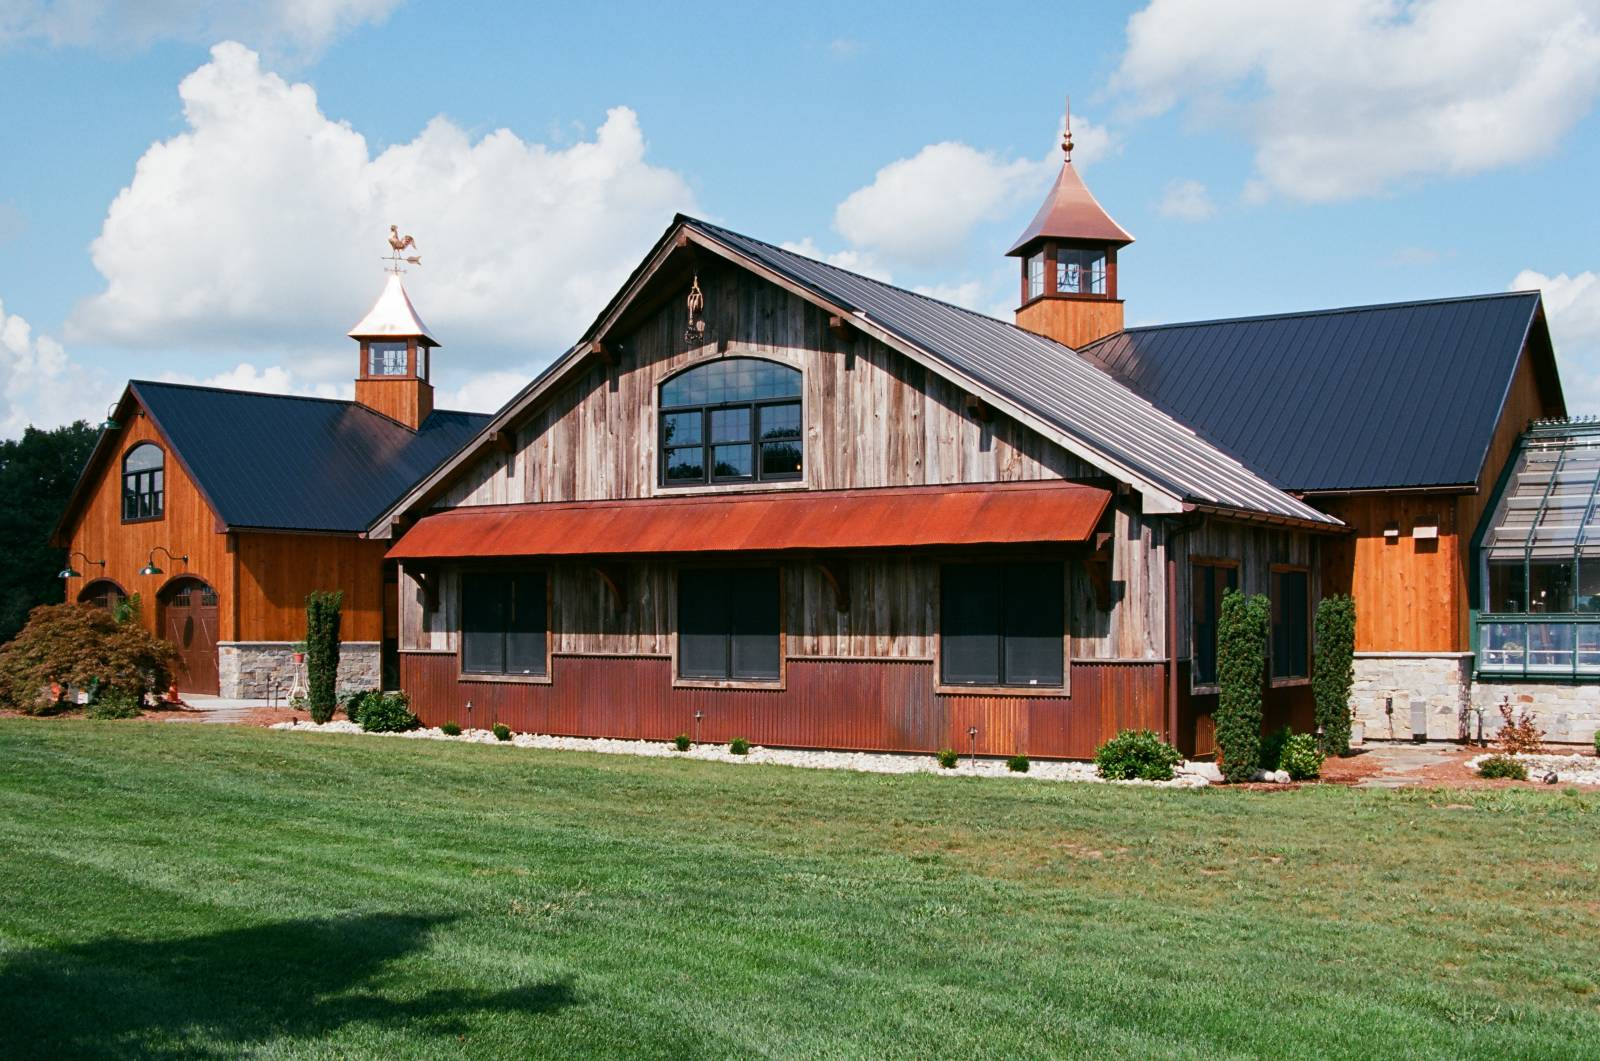 Reclaimed Barn Board Siding & Timber Frame Eyebrow Roof with Rusty Metal on Pool Room Exterior